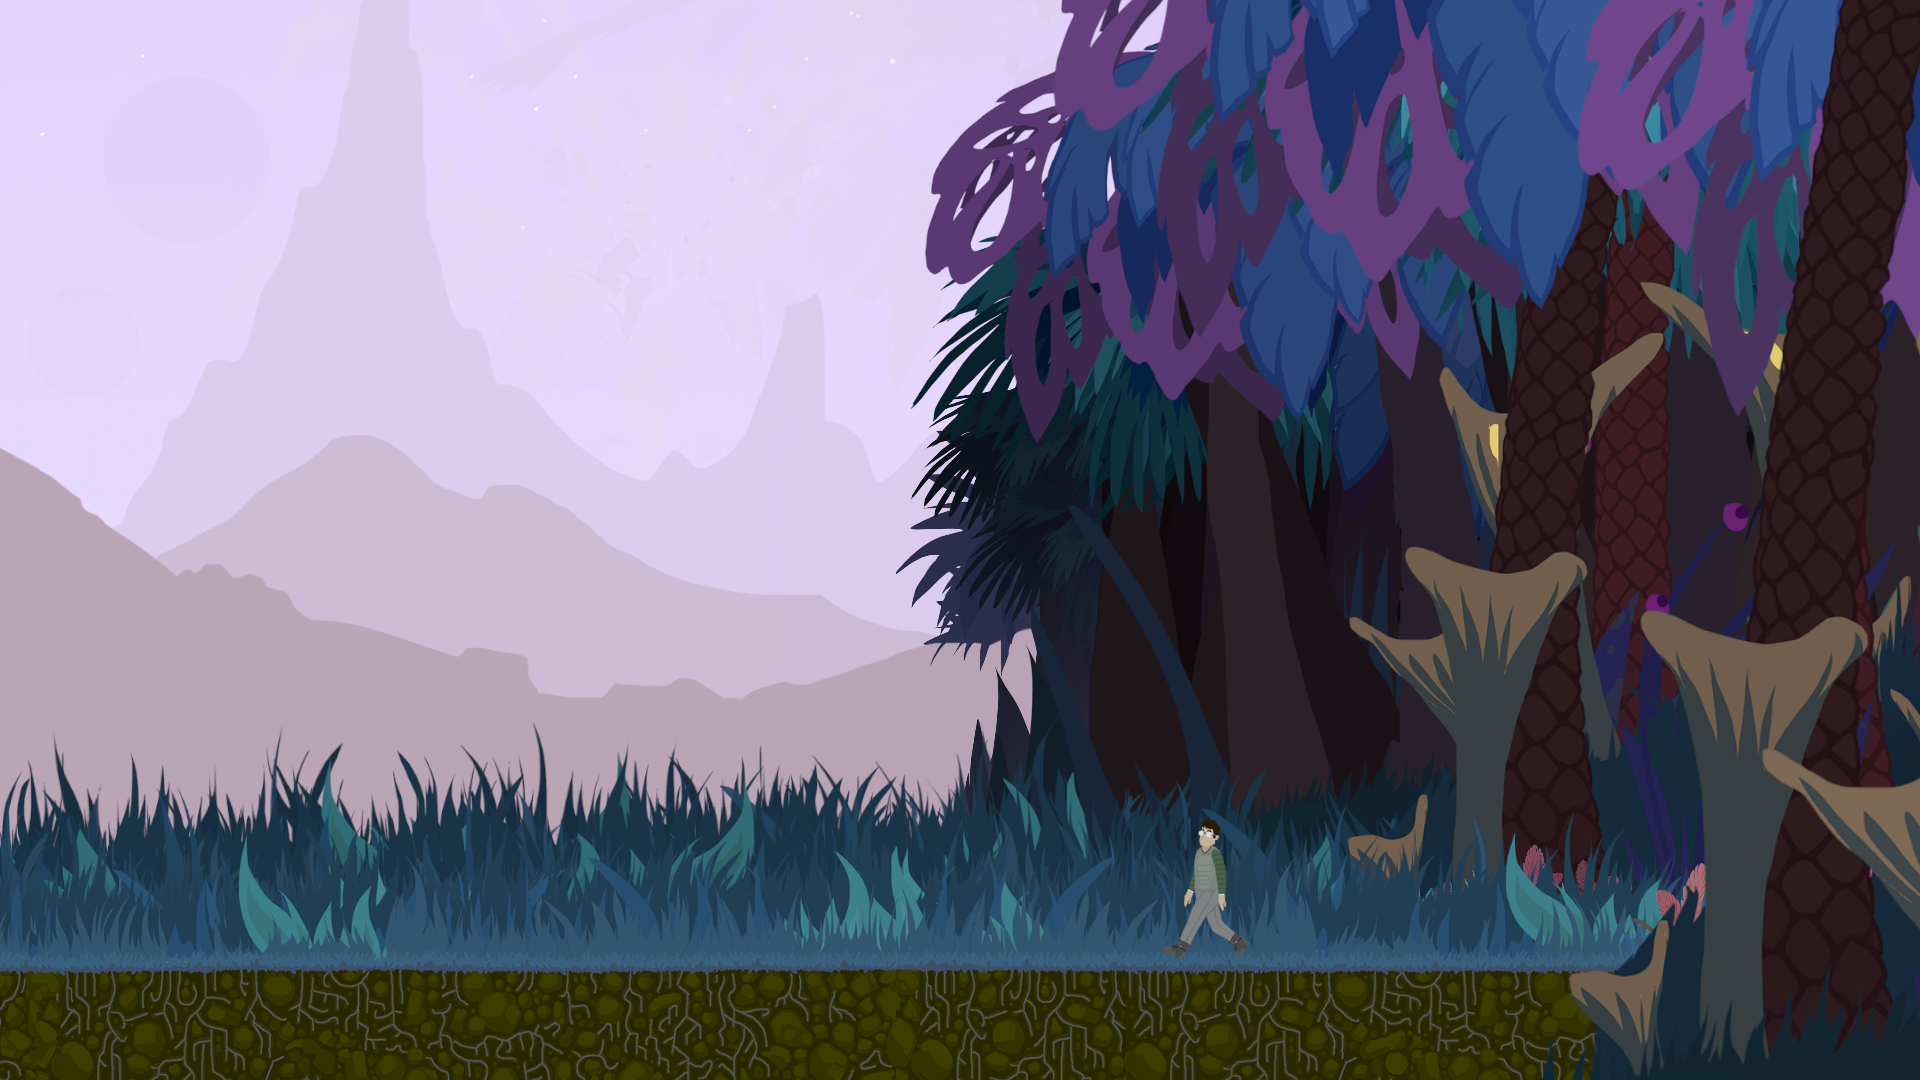 Alone on an unknown planet with vast forests and countless creatures